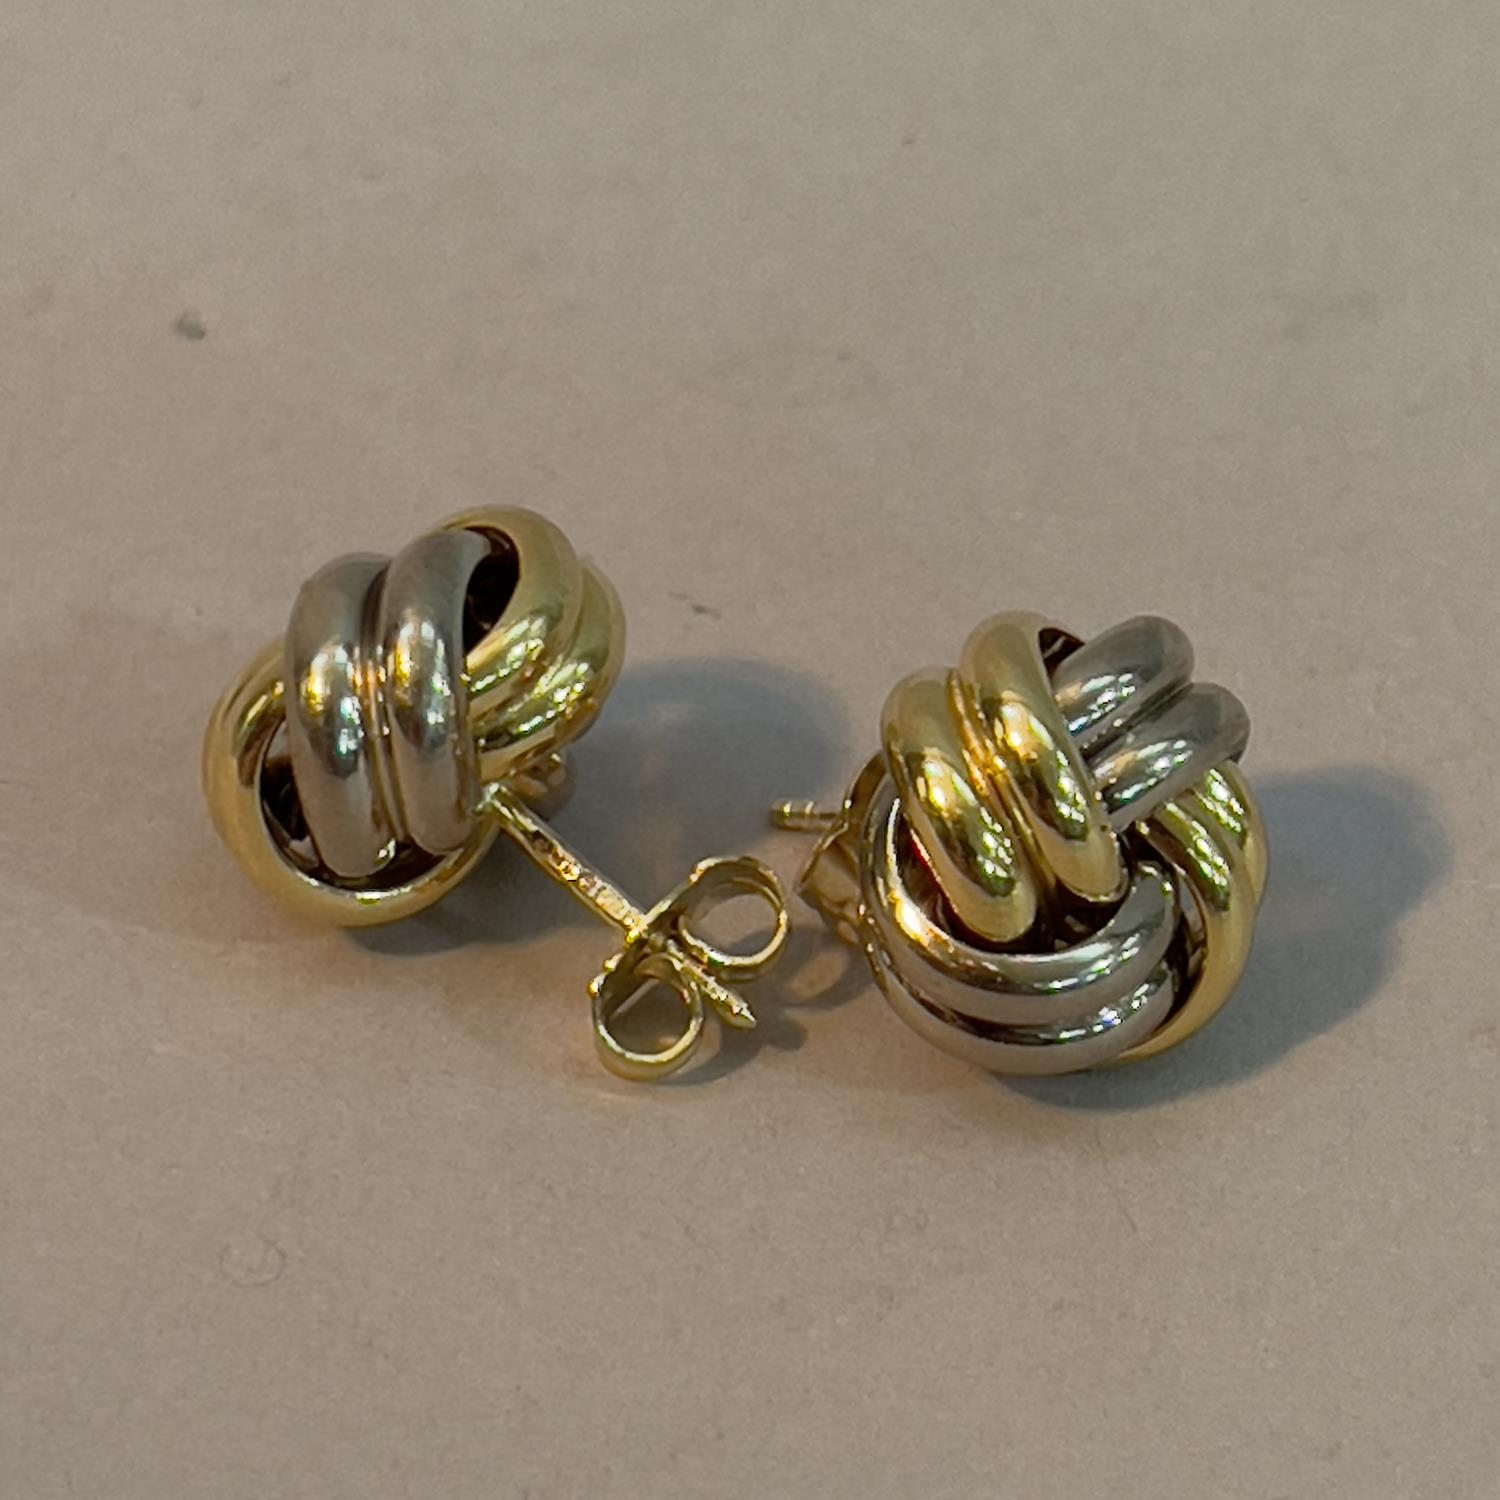 A pair of knot ear studs in 18ct white gold, approximate diameter 11mm, approximate weight 4g - Image 2 of 2